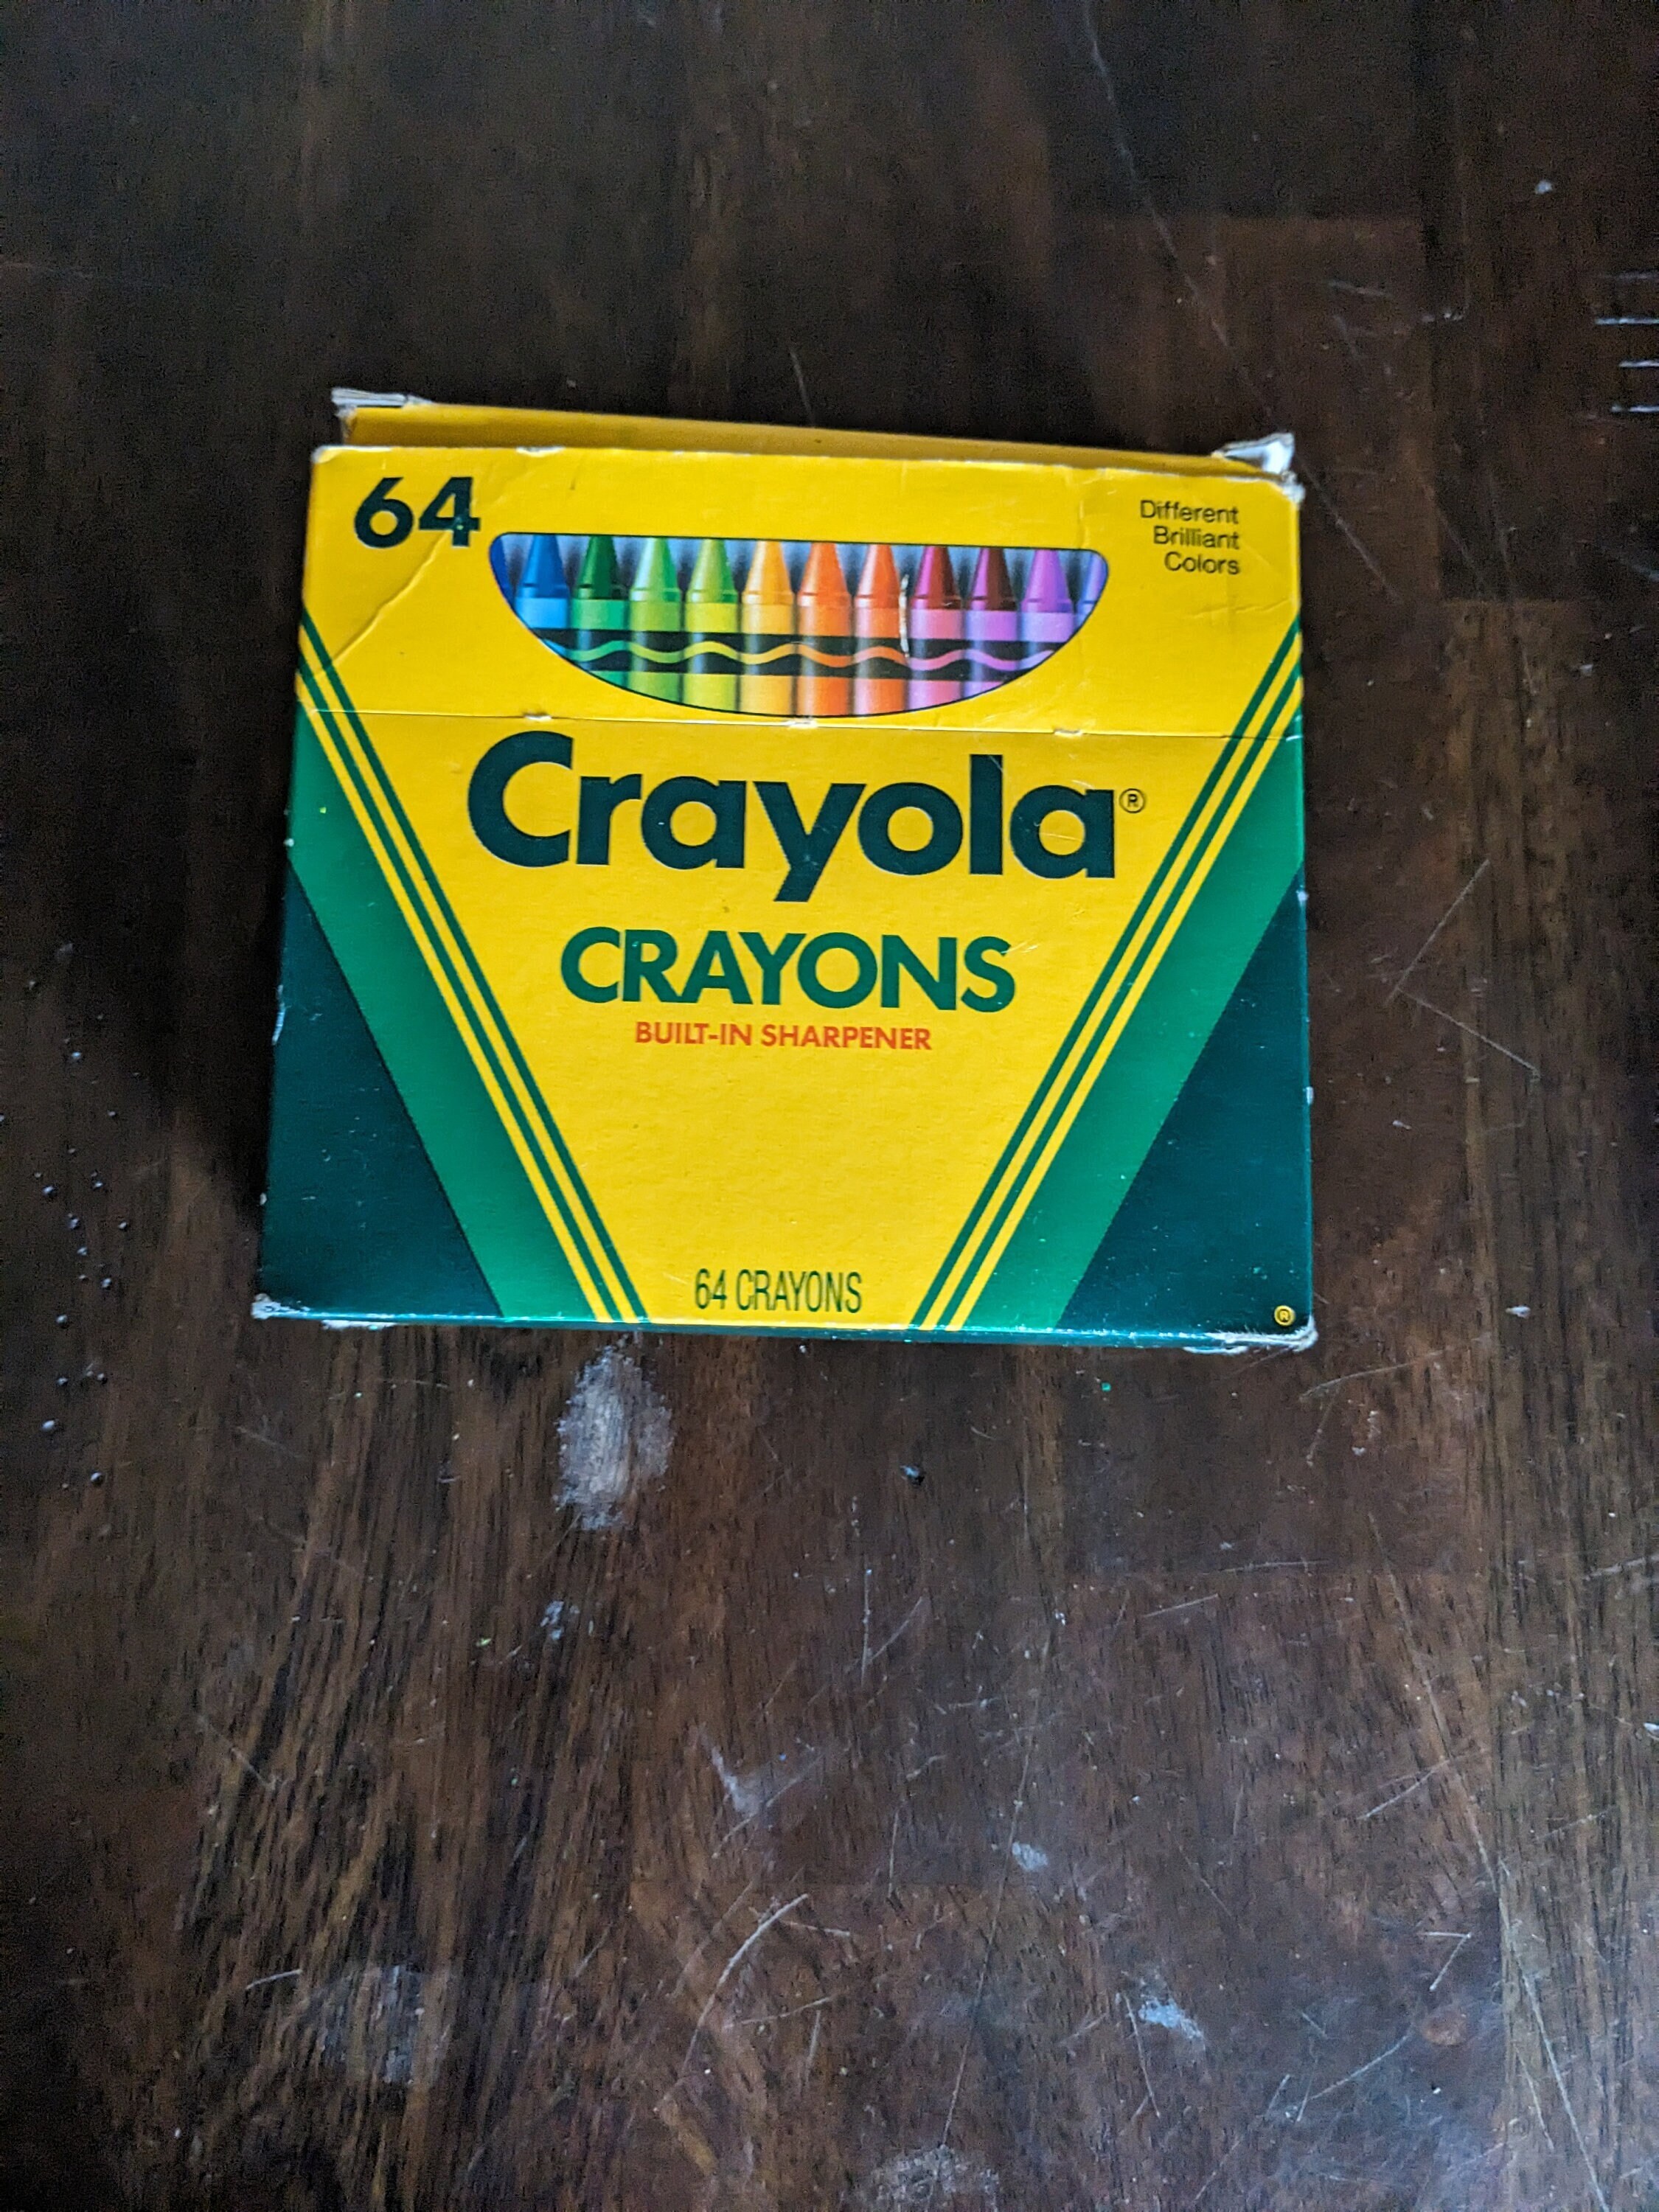 VTG Binney & Smith 24 Pack Crayola Crayons Different Brilliant Colors LT22